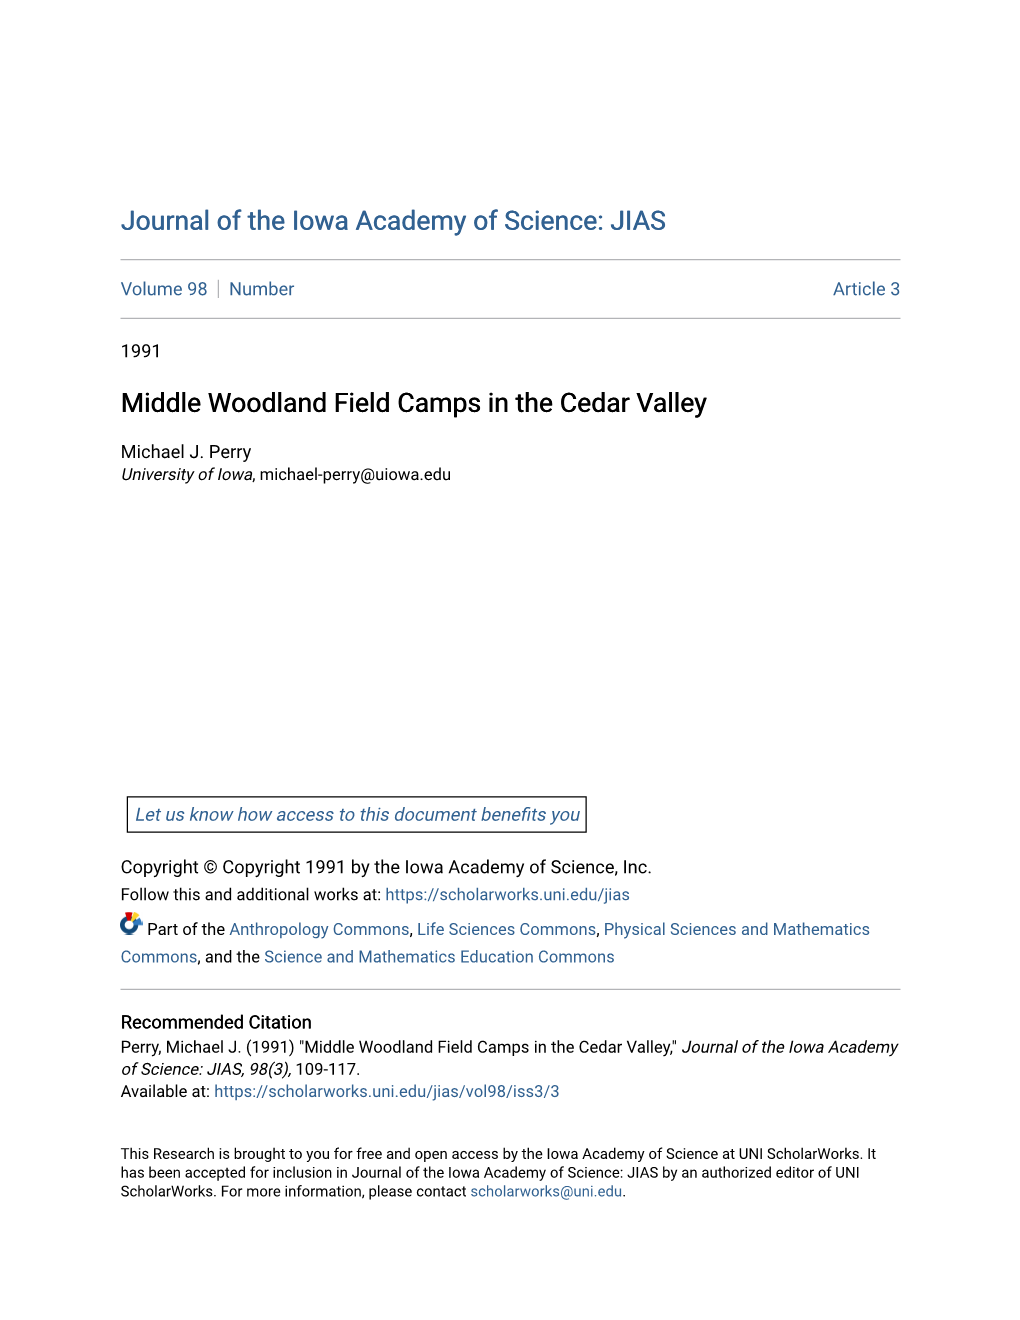 Middle Woodland Field Camps in the Cedar Valley